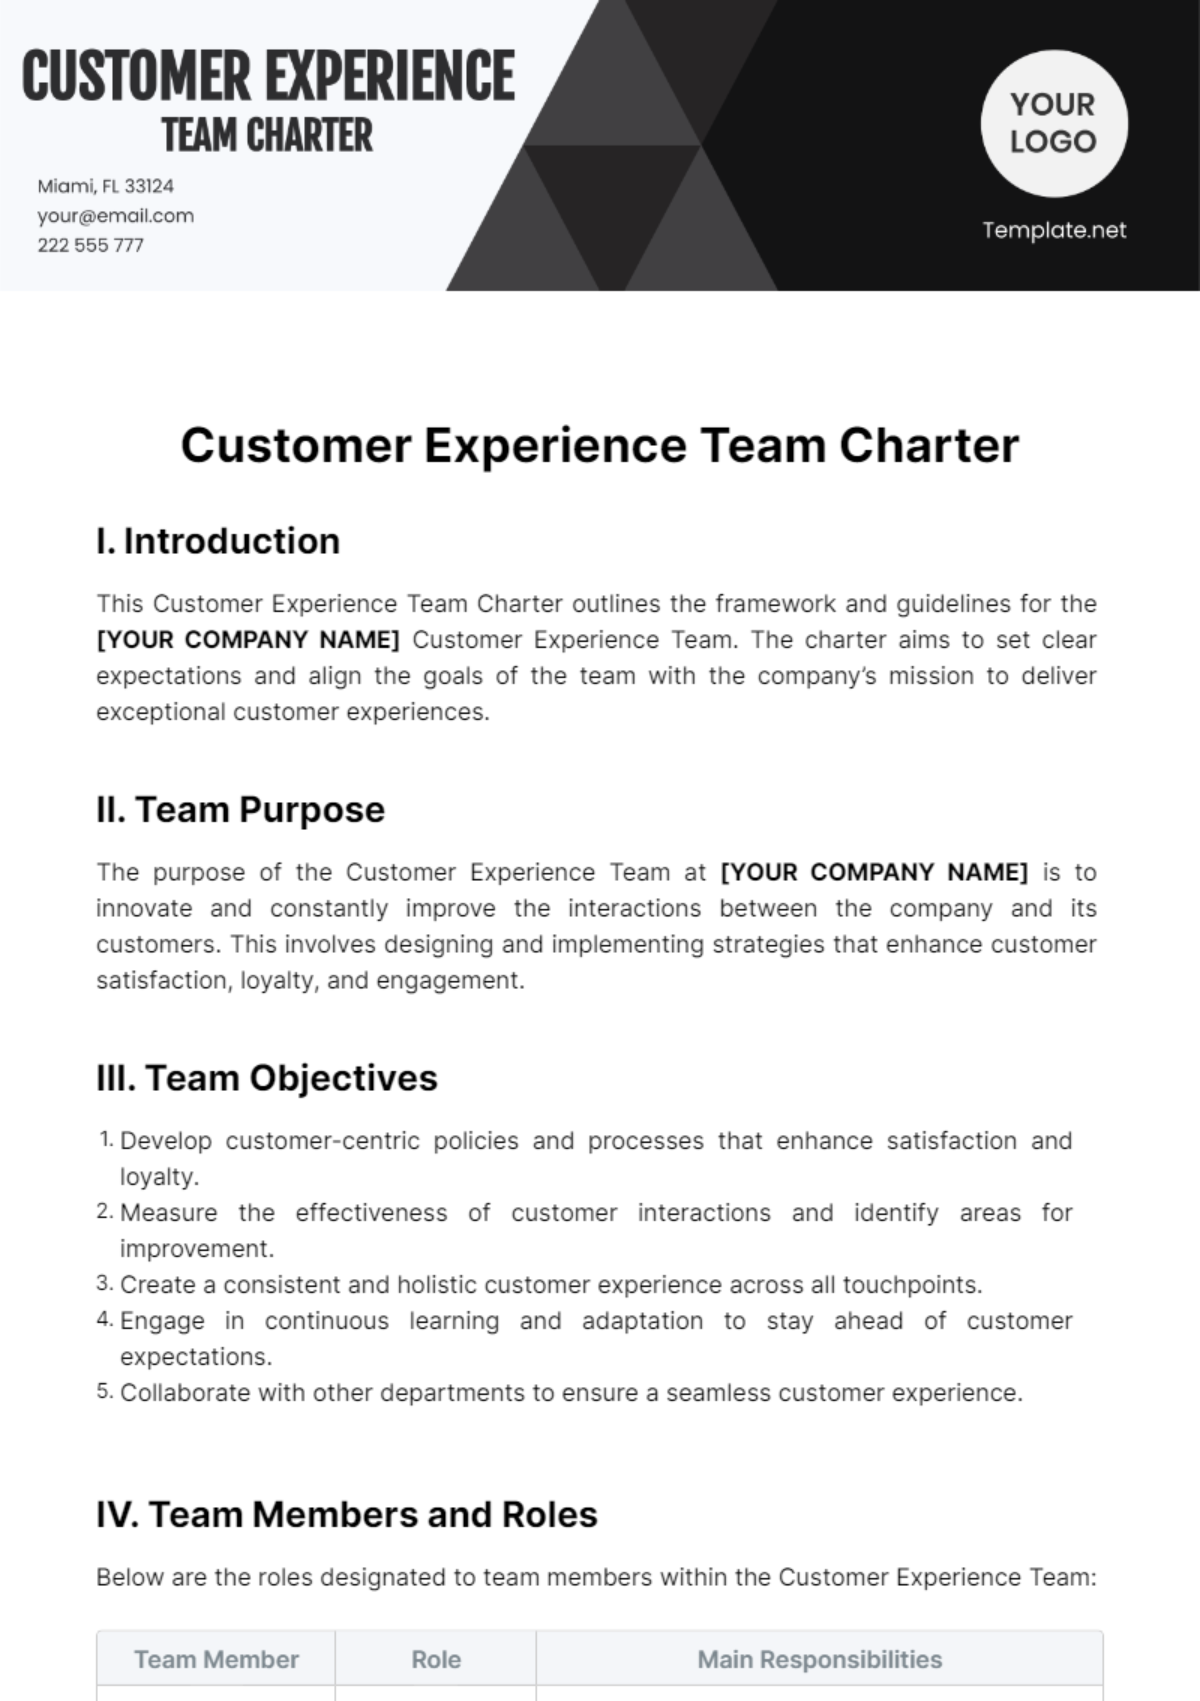 Free Customer Experience Team Charter Template